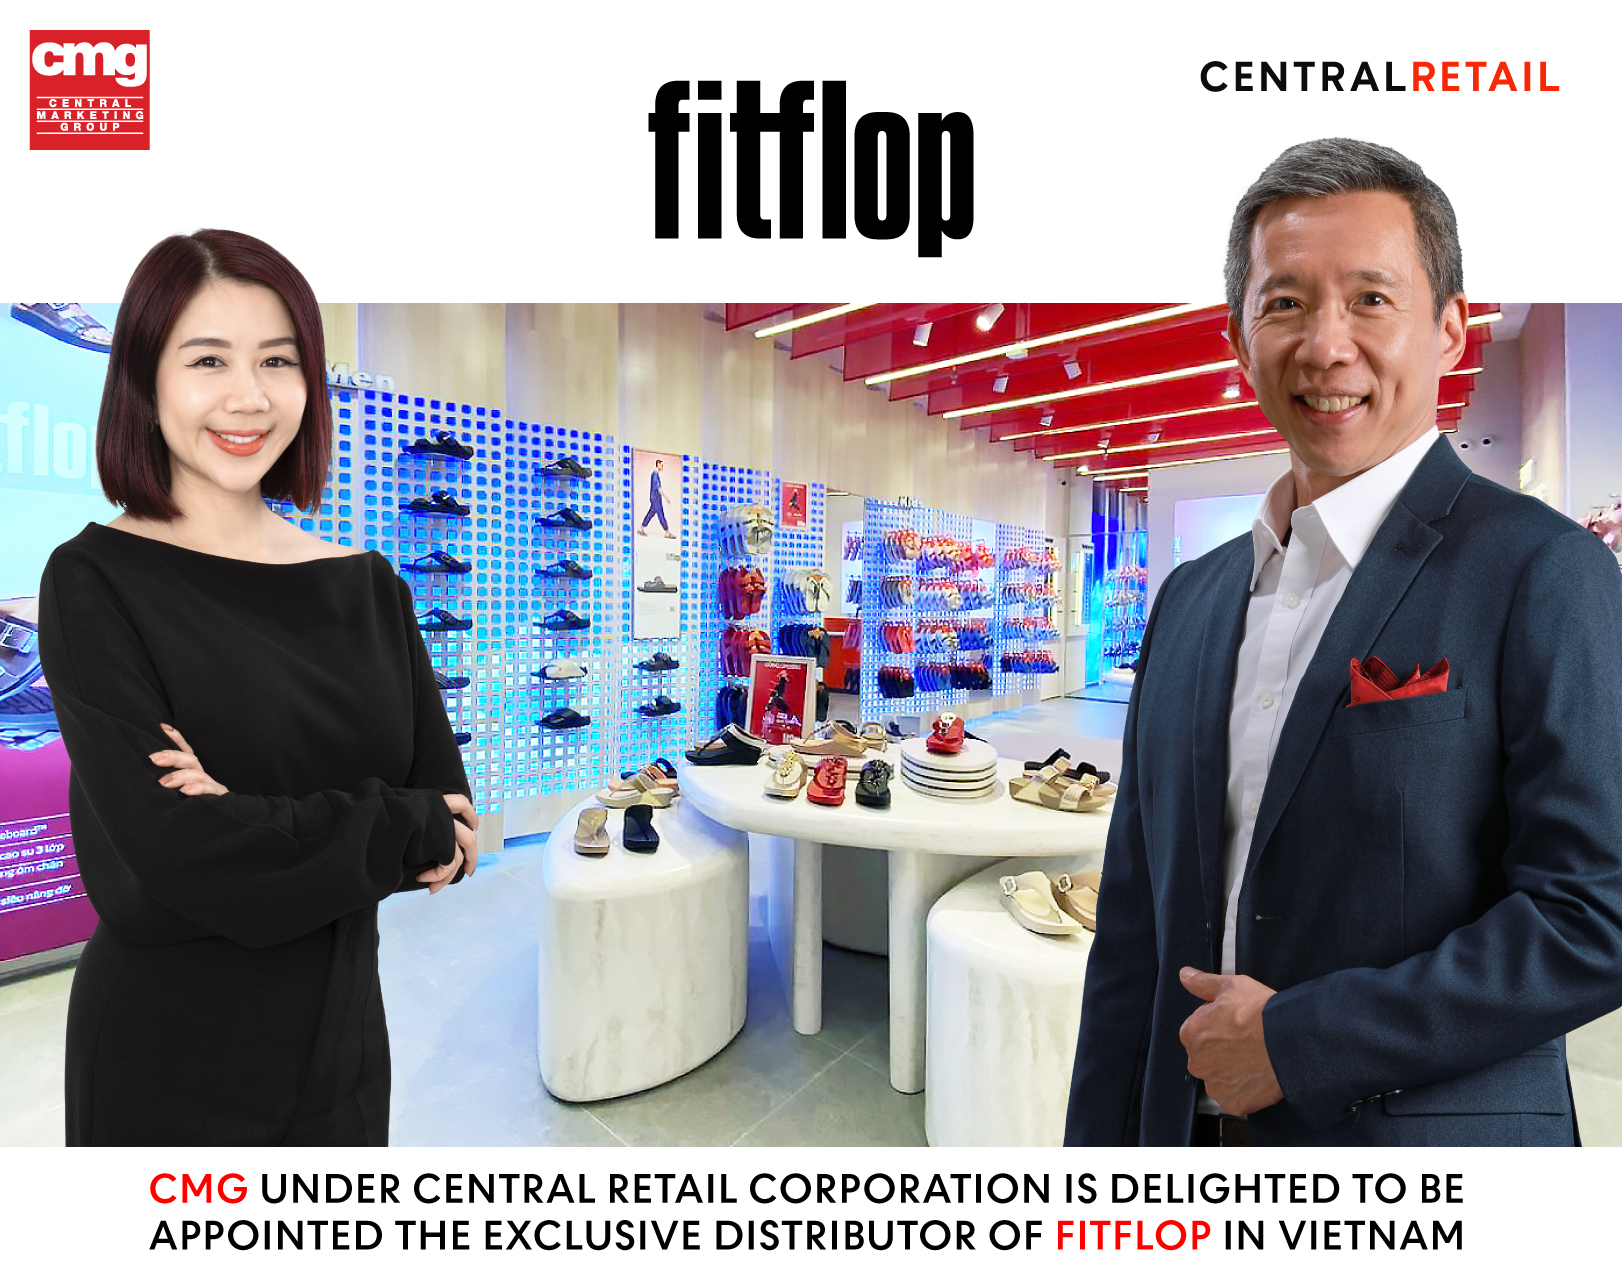 CMG under Central Retail Vietnam is delighted to be appointed the exclusive distributor of FitFlop in Vietnam